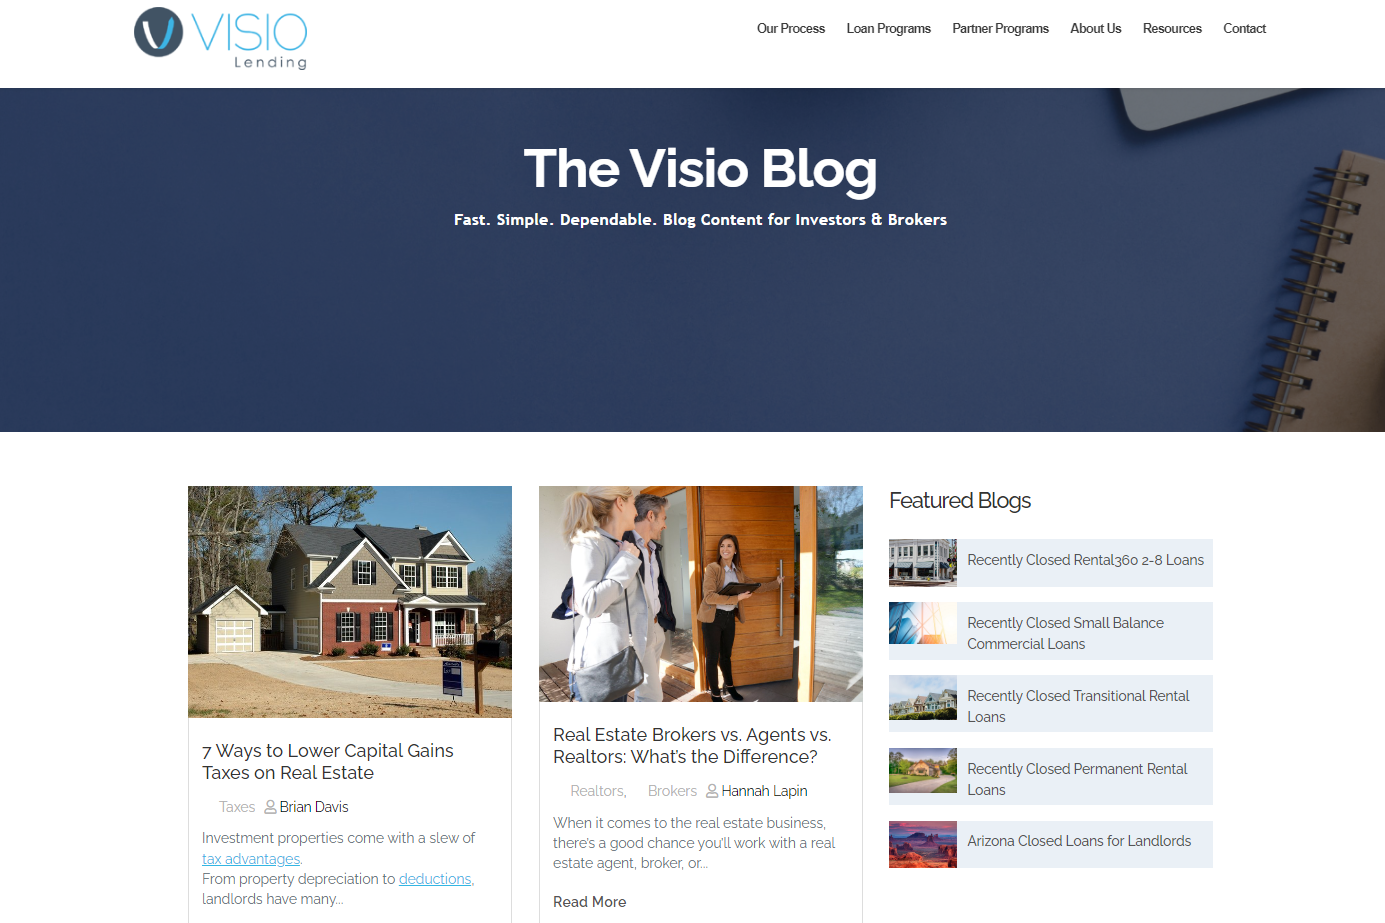 Visio's blog page